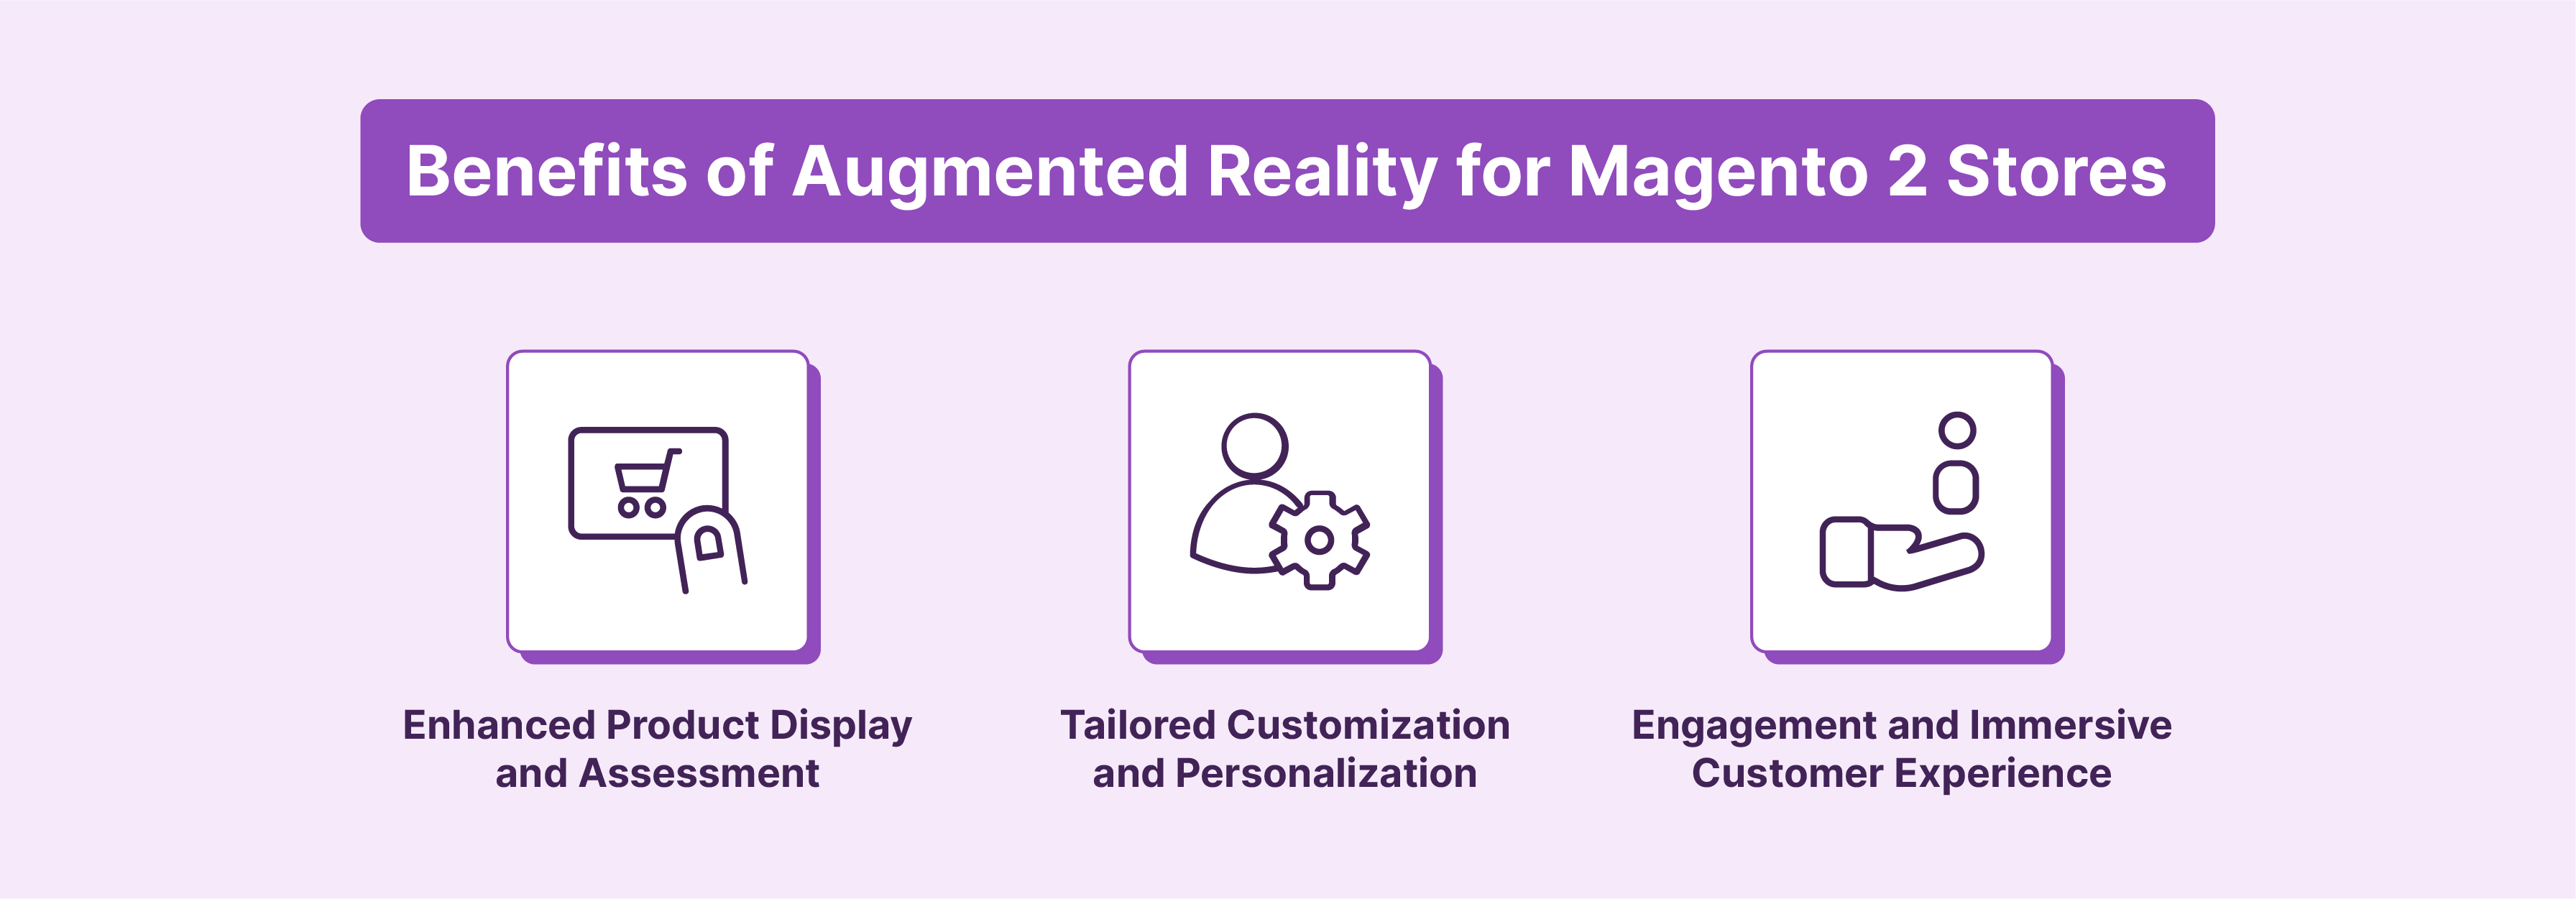 Advantages of Augmented Reality for customer engagement in Magento 2